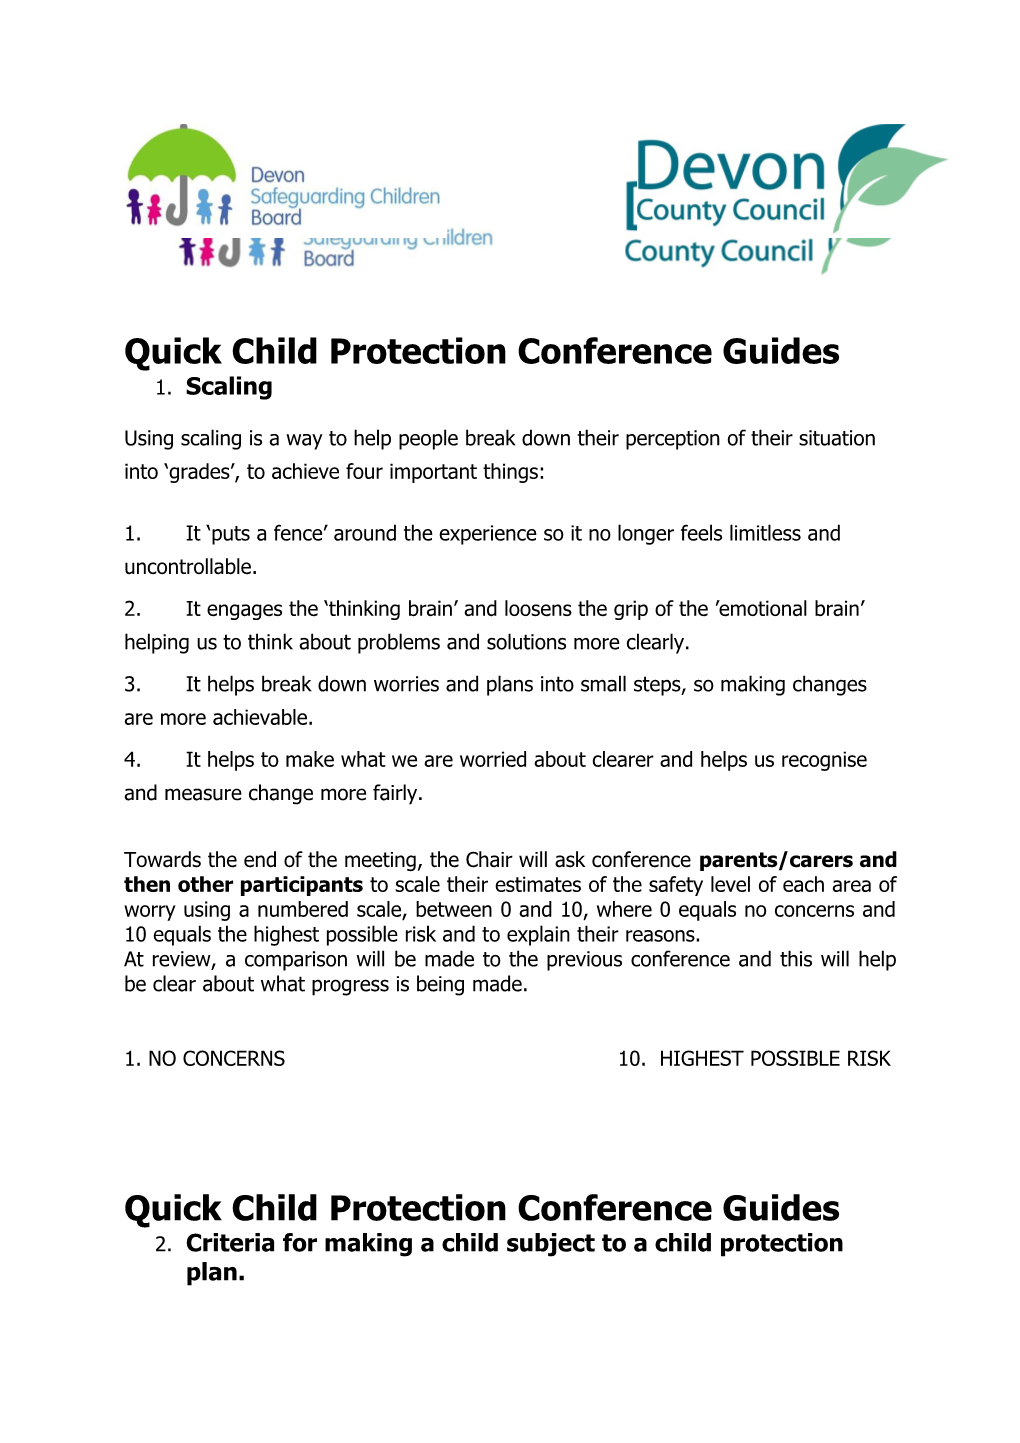 Quick Child Protection Conference Guides